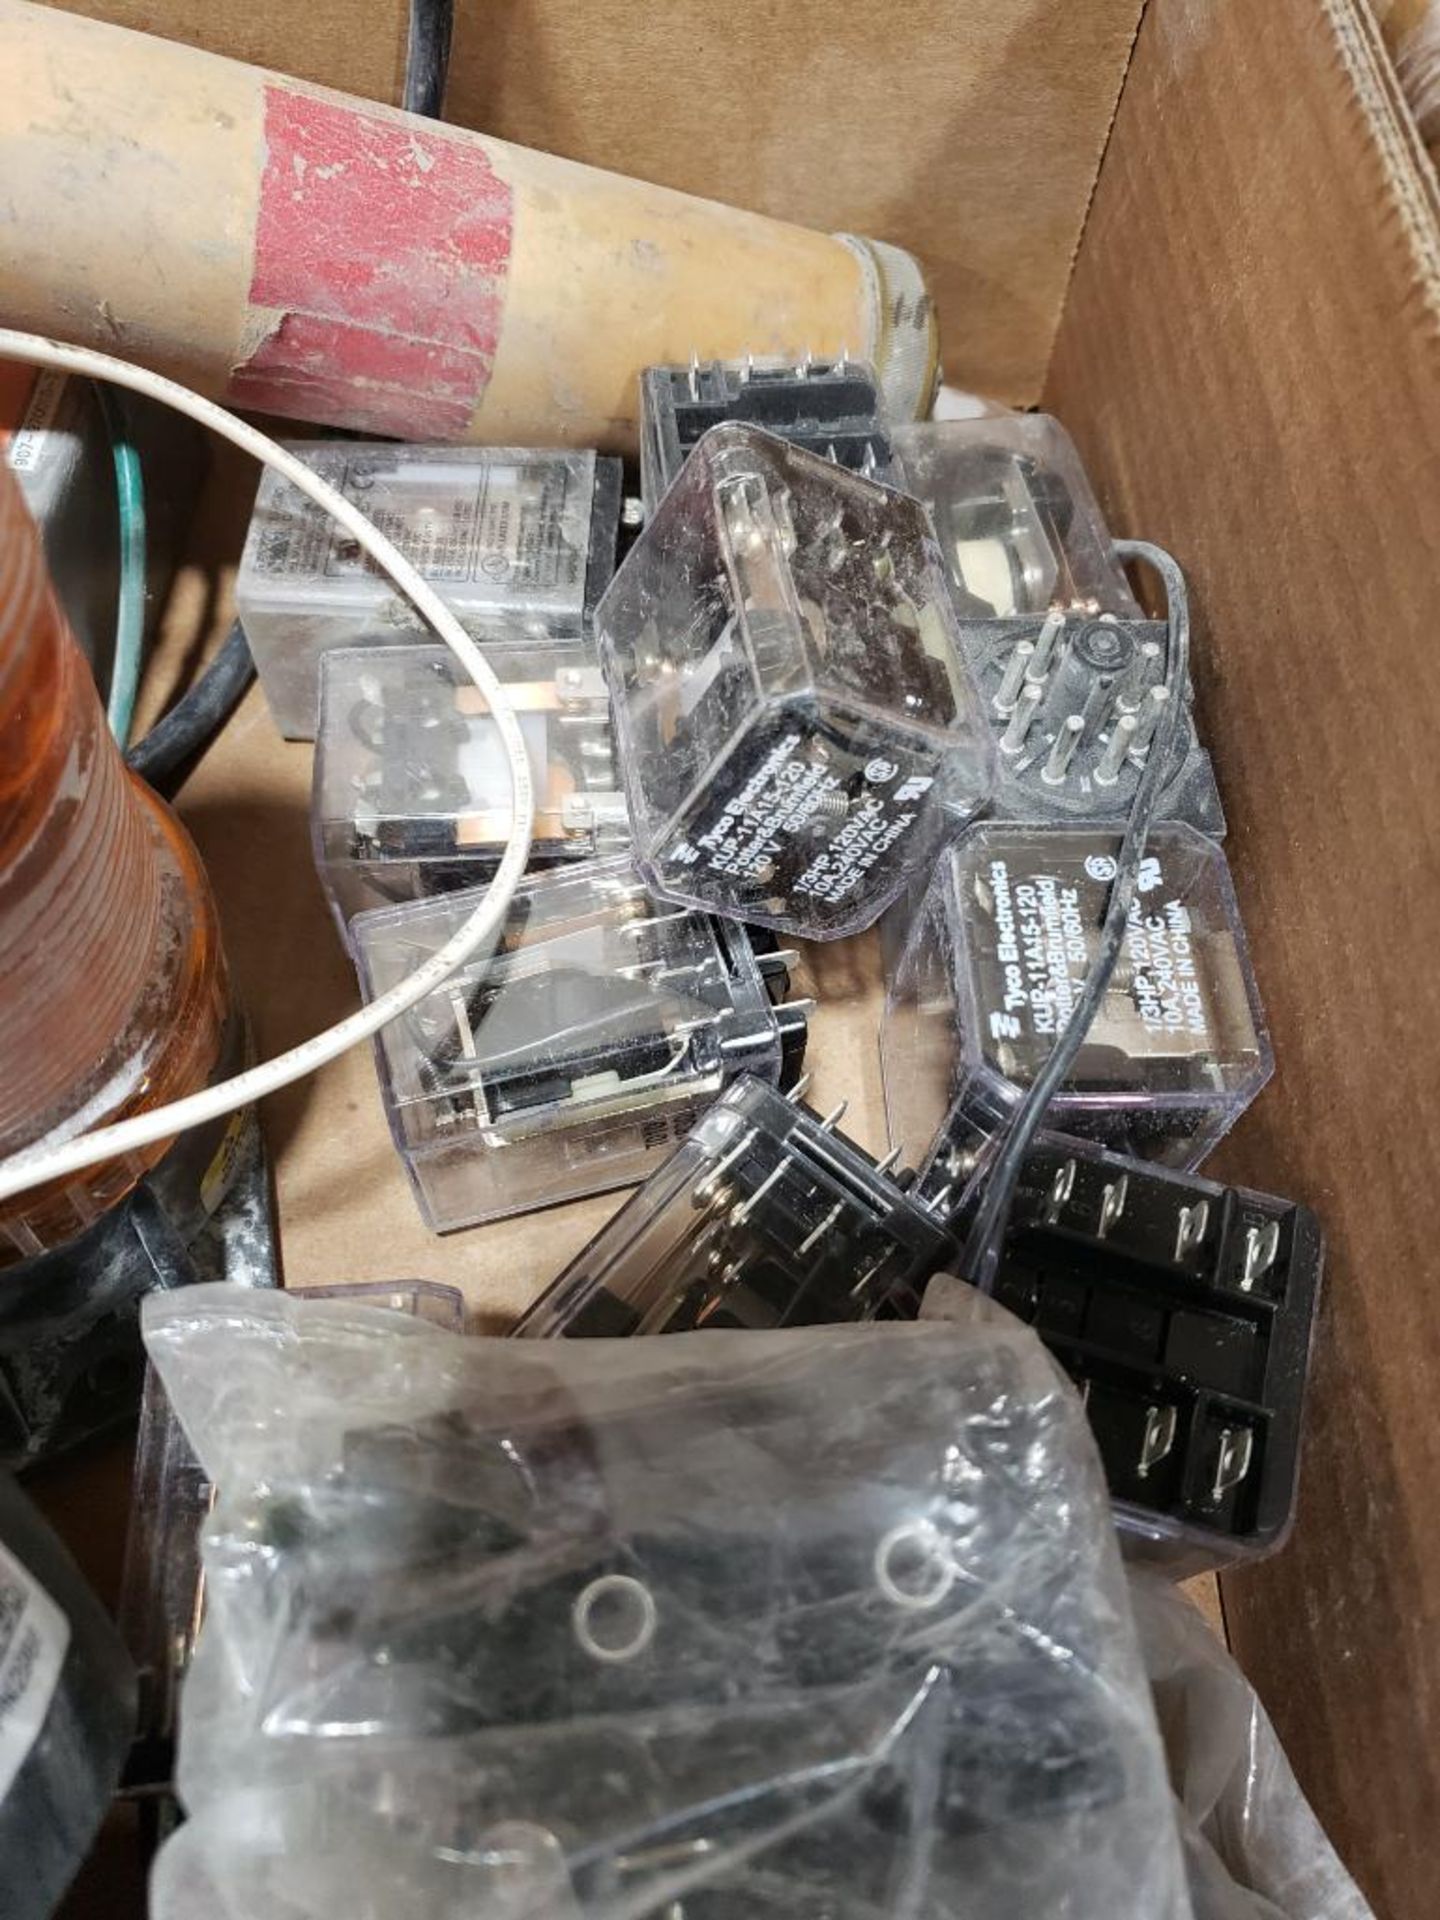 Qty 3 - Boxes of assorted electrical parts. - Image 8 of 18